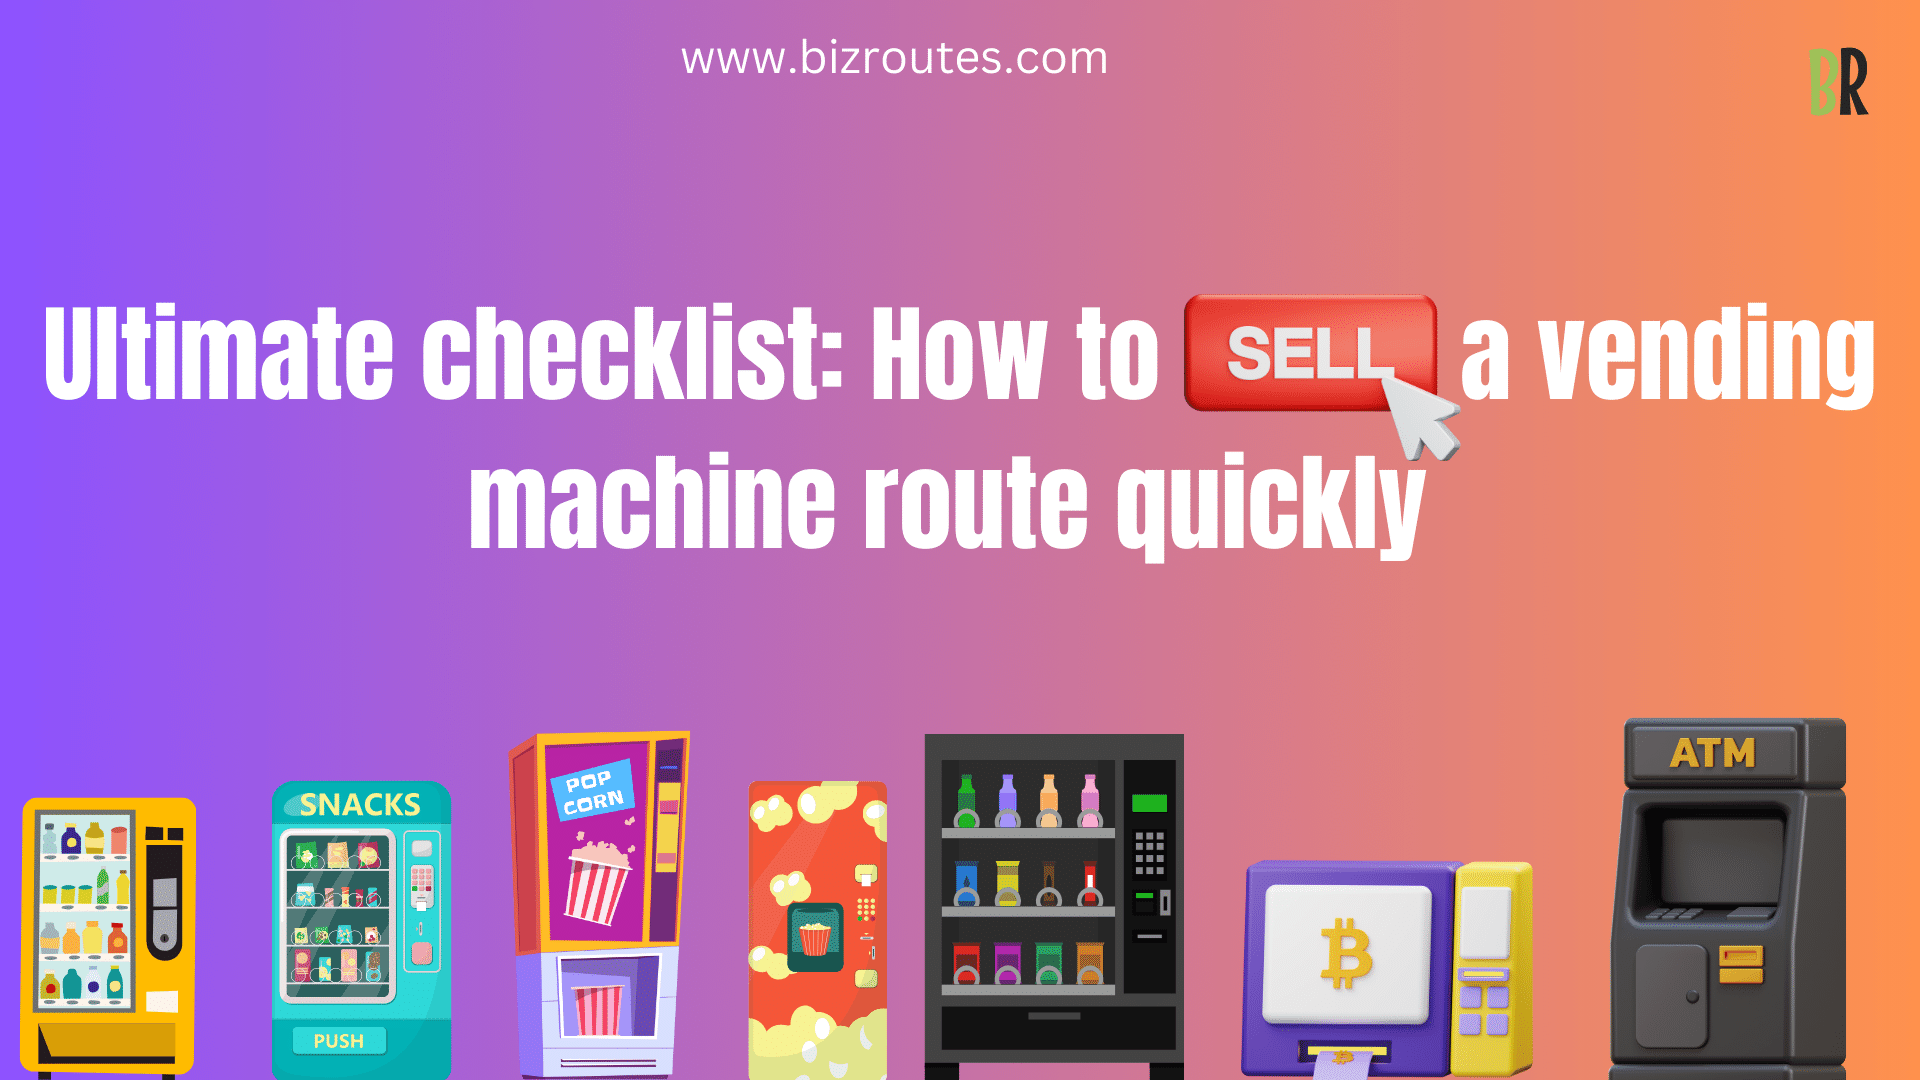 How to sell a vending machine route quickly